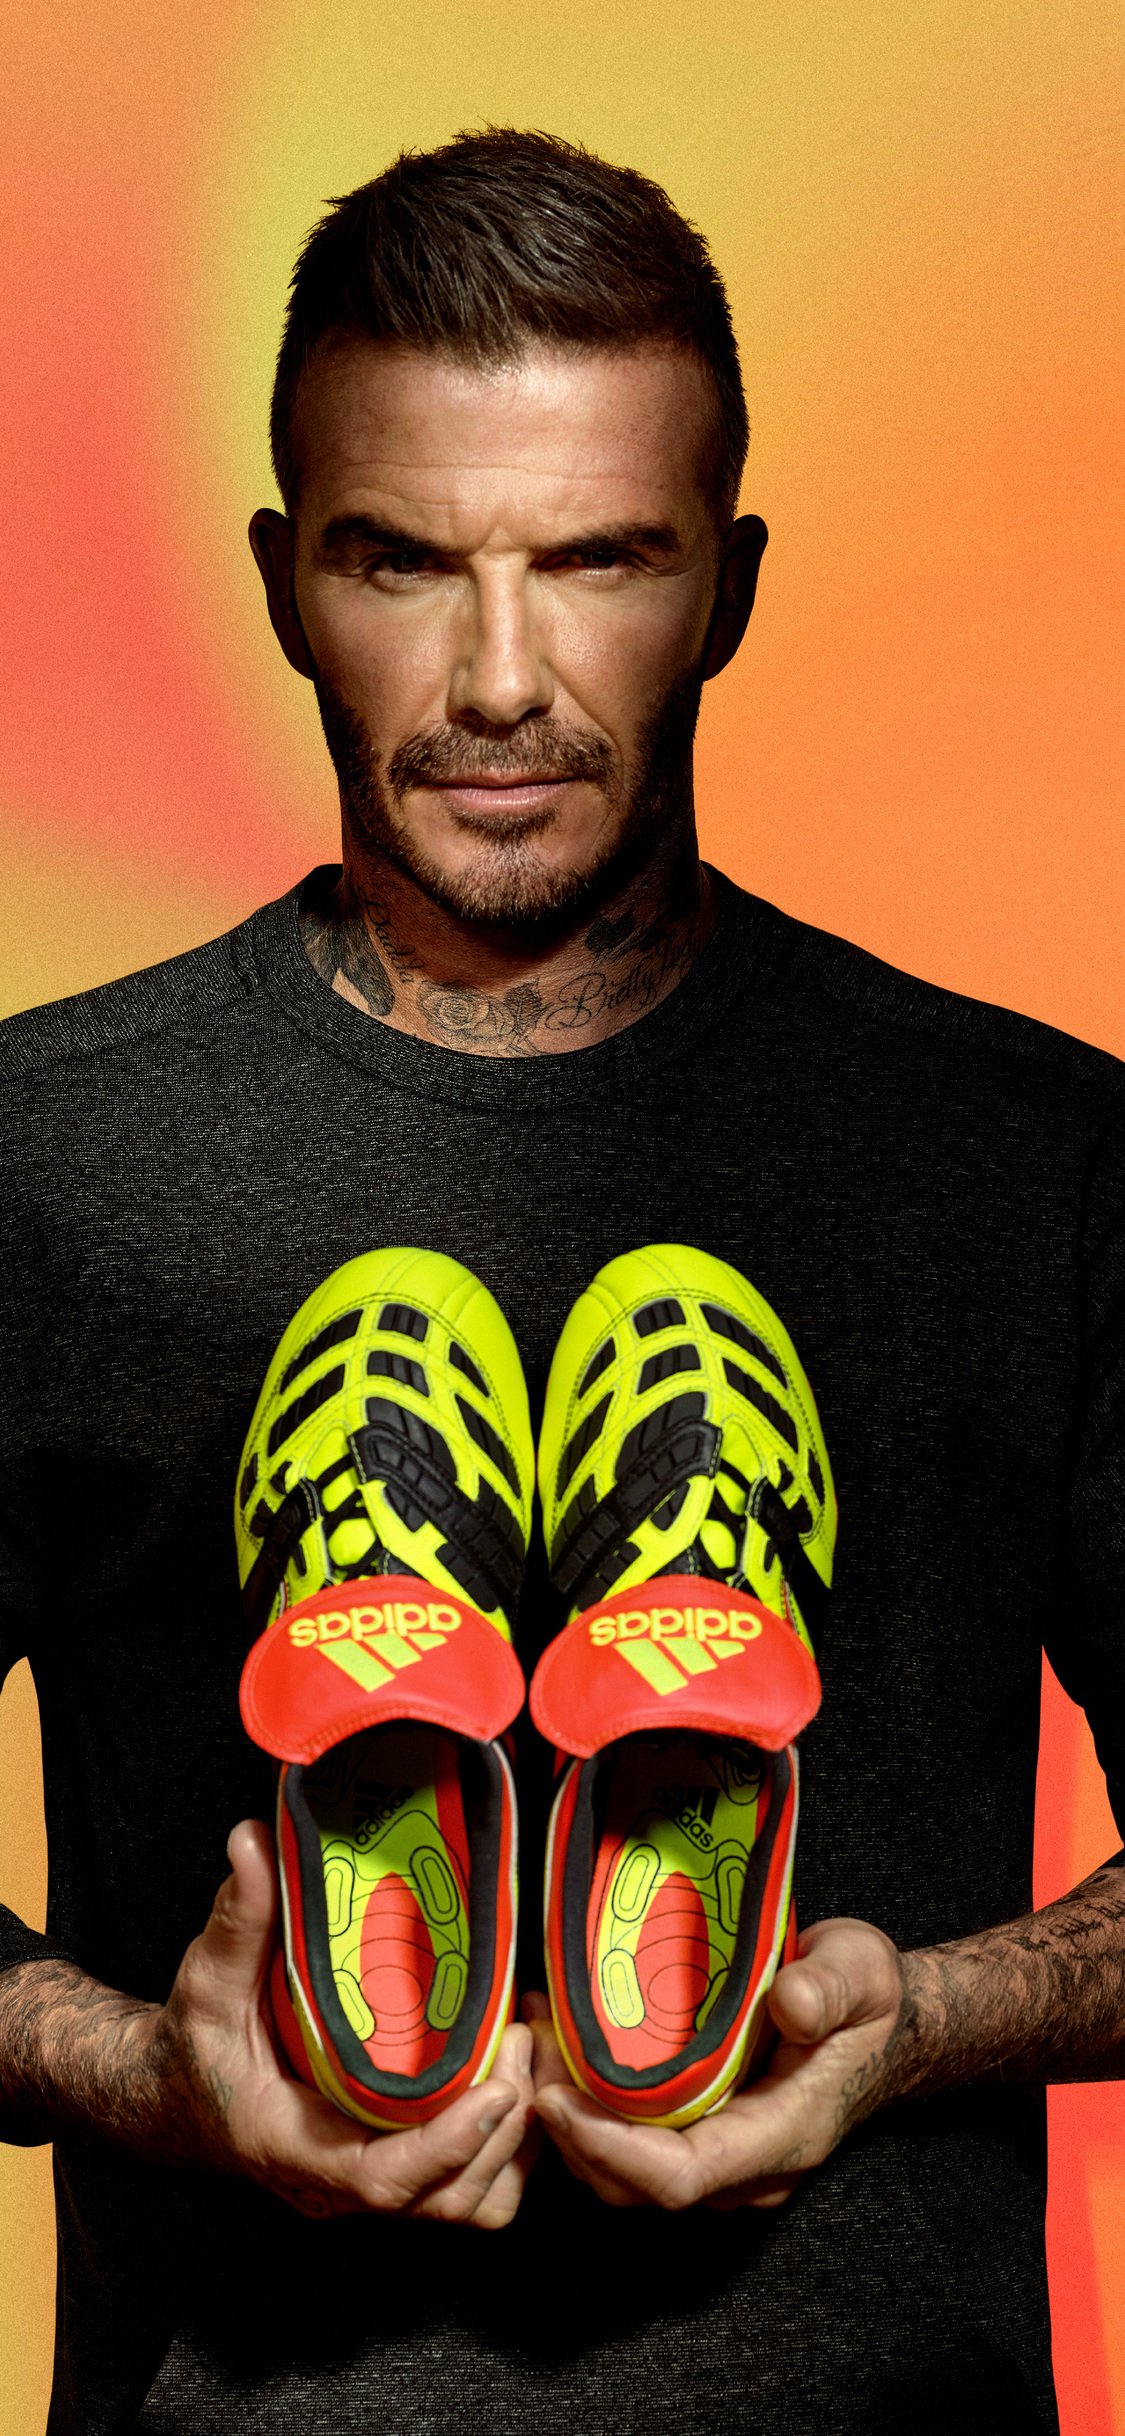 David Beckham Adidas Fifa 2018 iPhone XS, iPhone iPhone X HD 4k Wallpaper, Image, Background, Photo and Picture